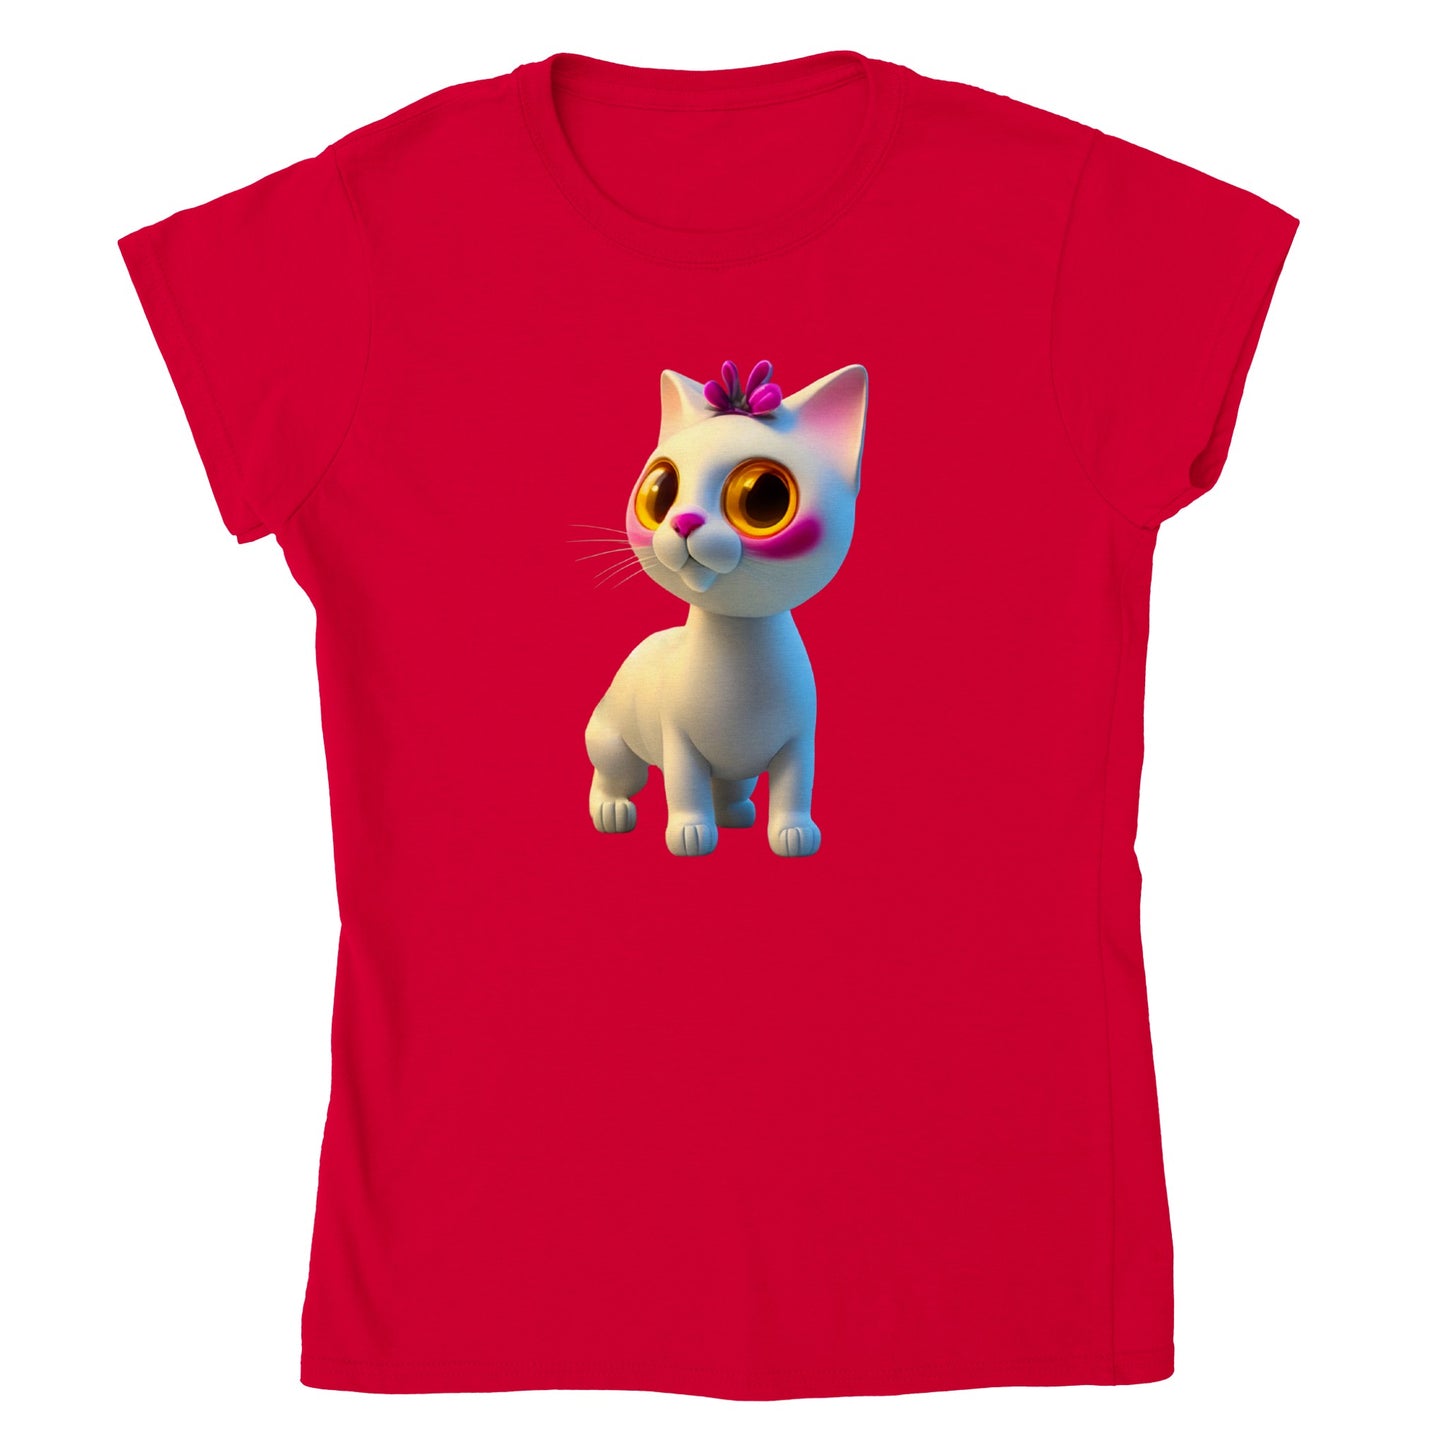 Adorable, Cool, Cute Cats and Kittens Toy - Classic Women’s Crewneck T-Shirt 47